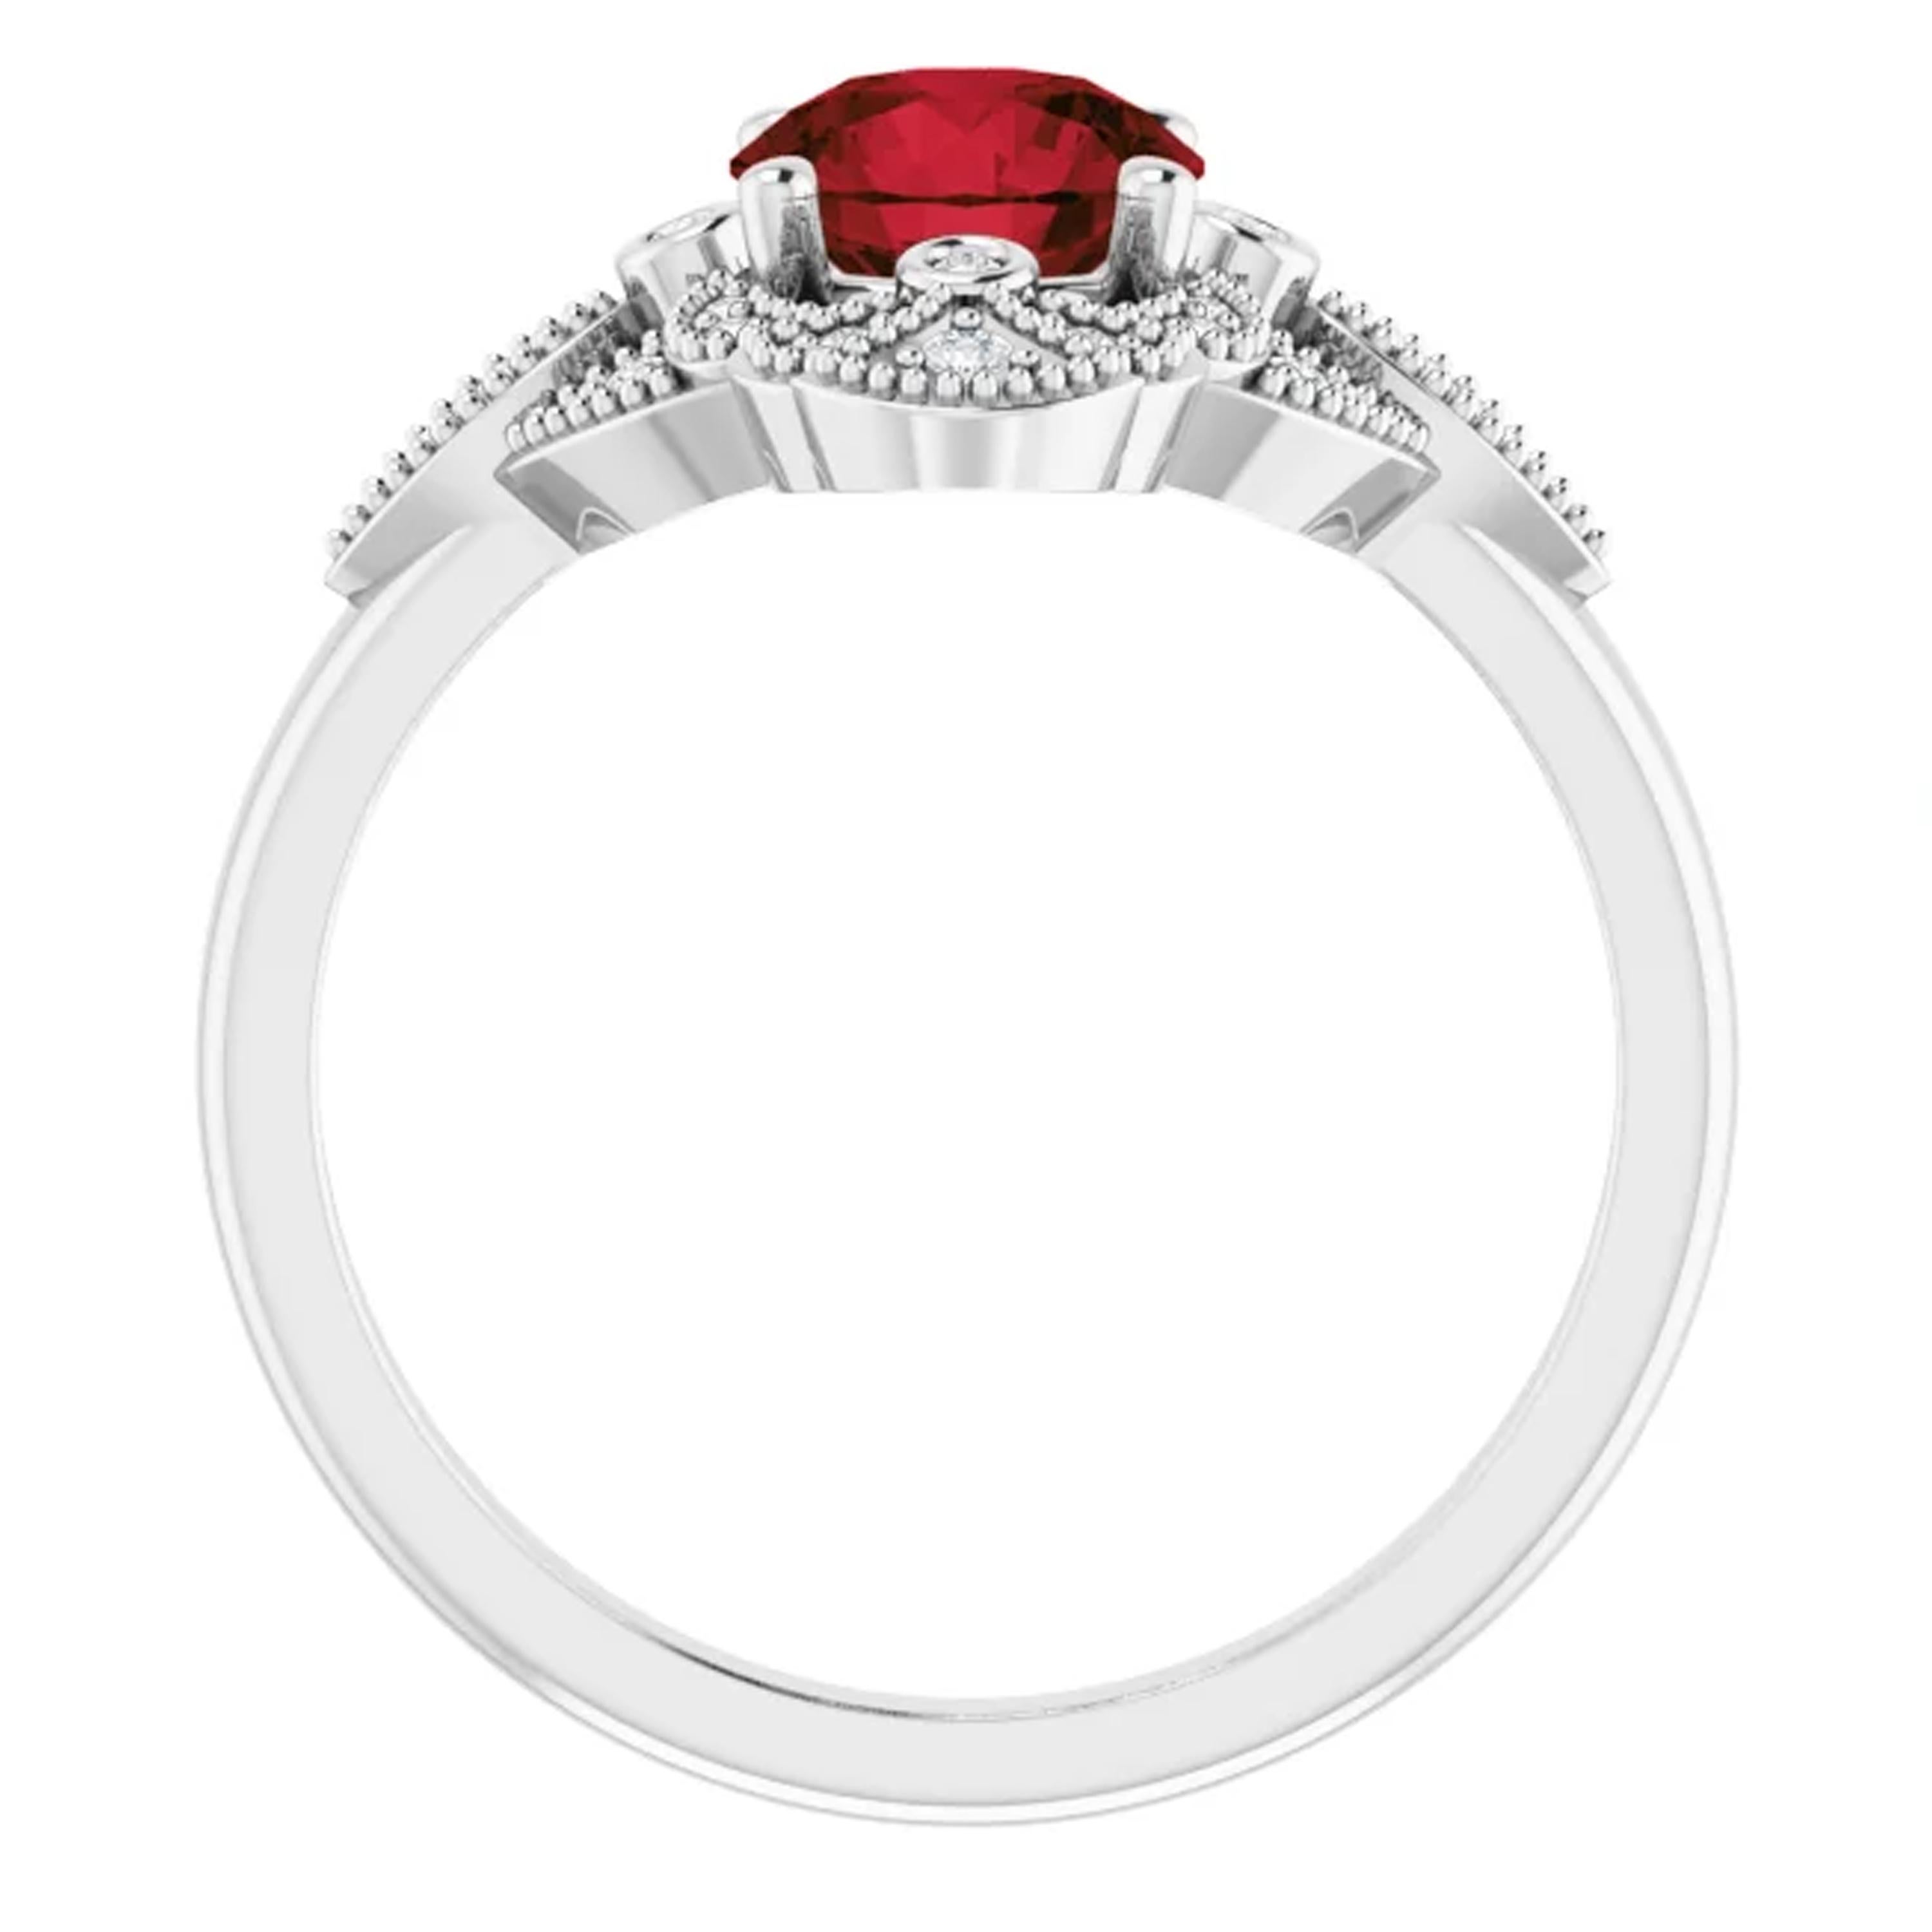 Inspired by the Victorian era; this vintage style bridal wedding ring set is adorned with a halo of shimmering white diamonds. Intricate milgrain detailing surrounds each natural diamond. Showcasing a red garnet 1.02 carat center stone, this wedding